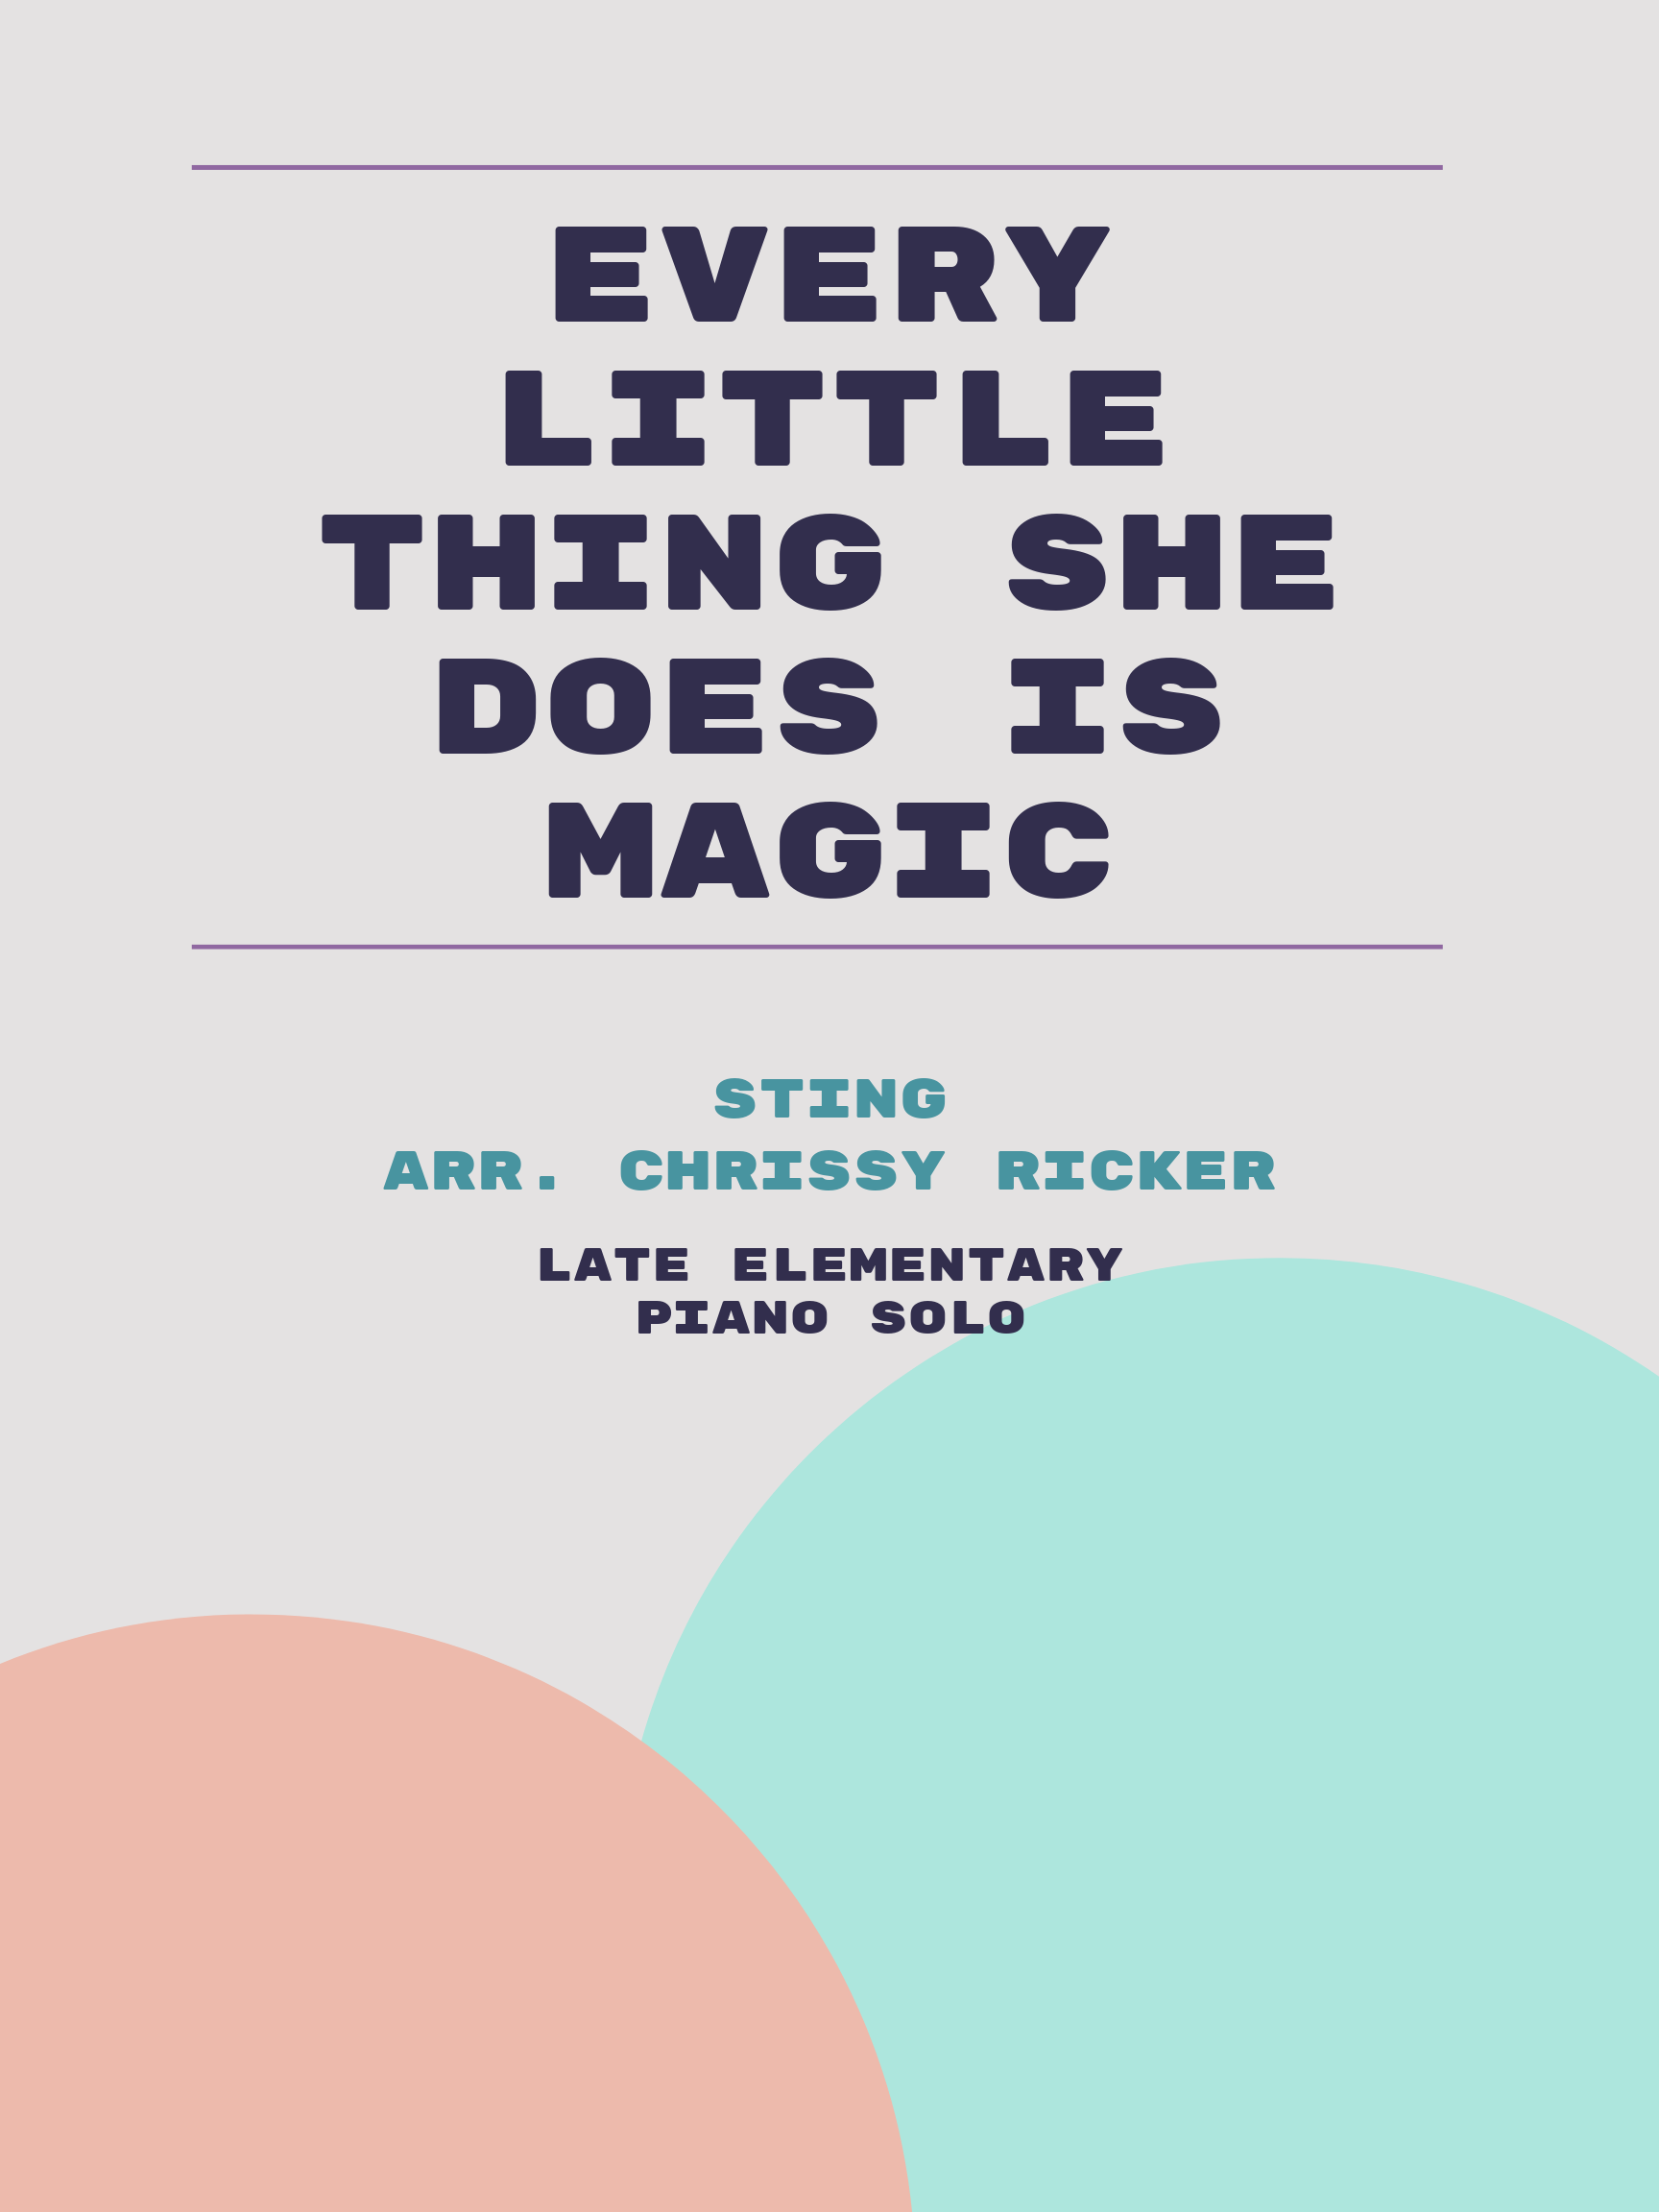 Every Little Thing She Does is Magic by Sting